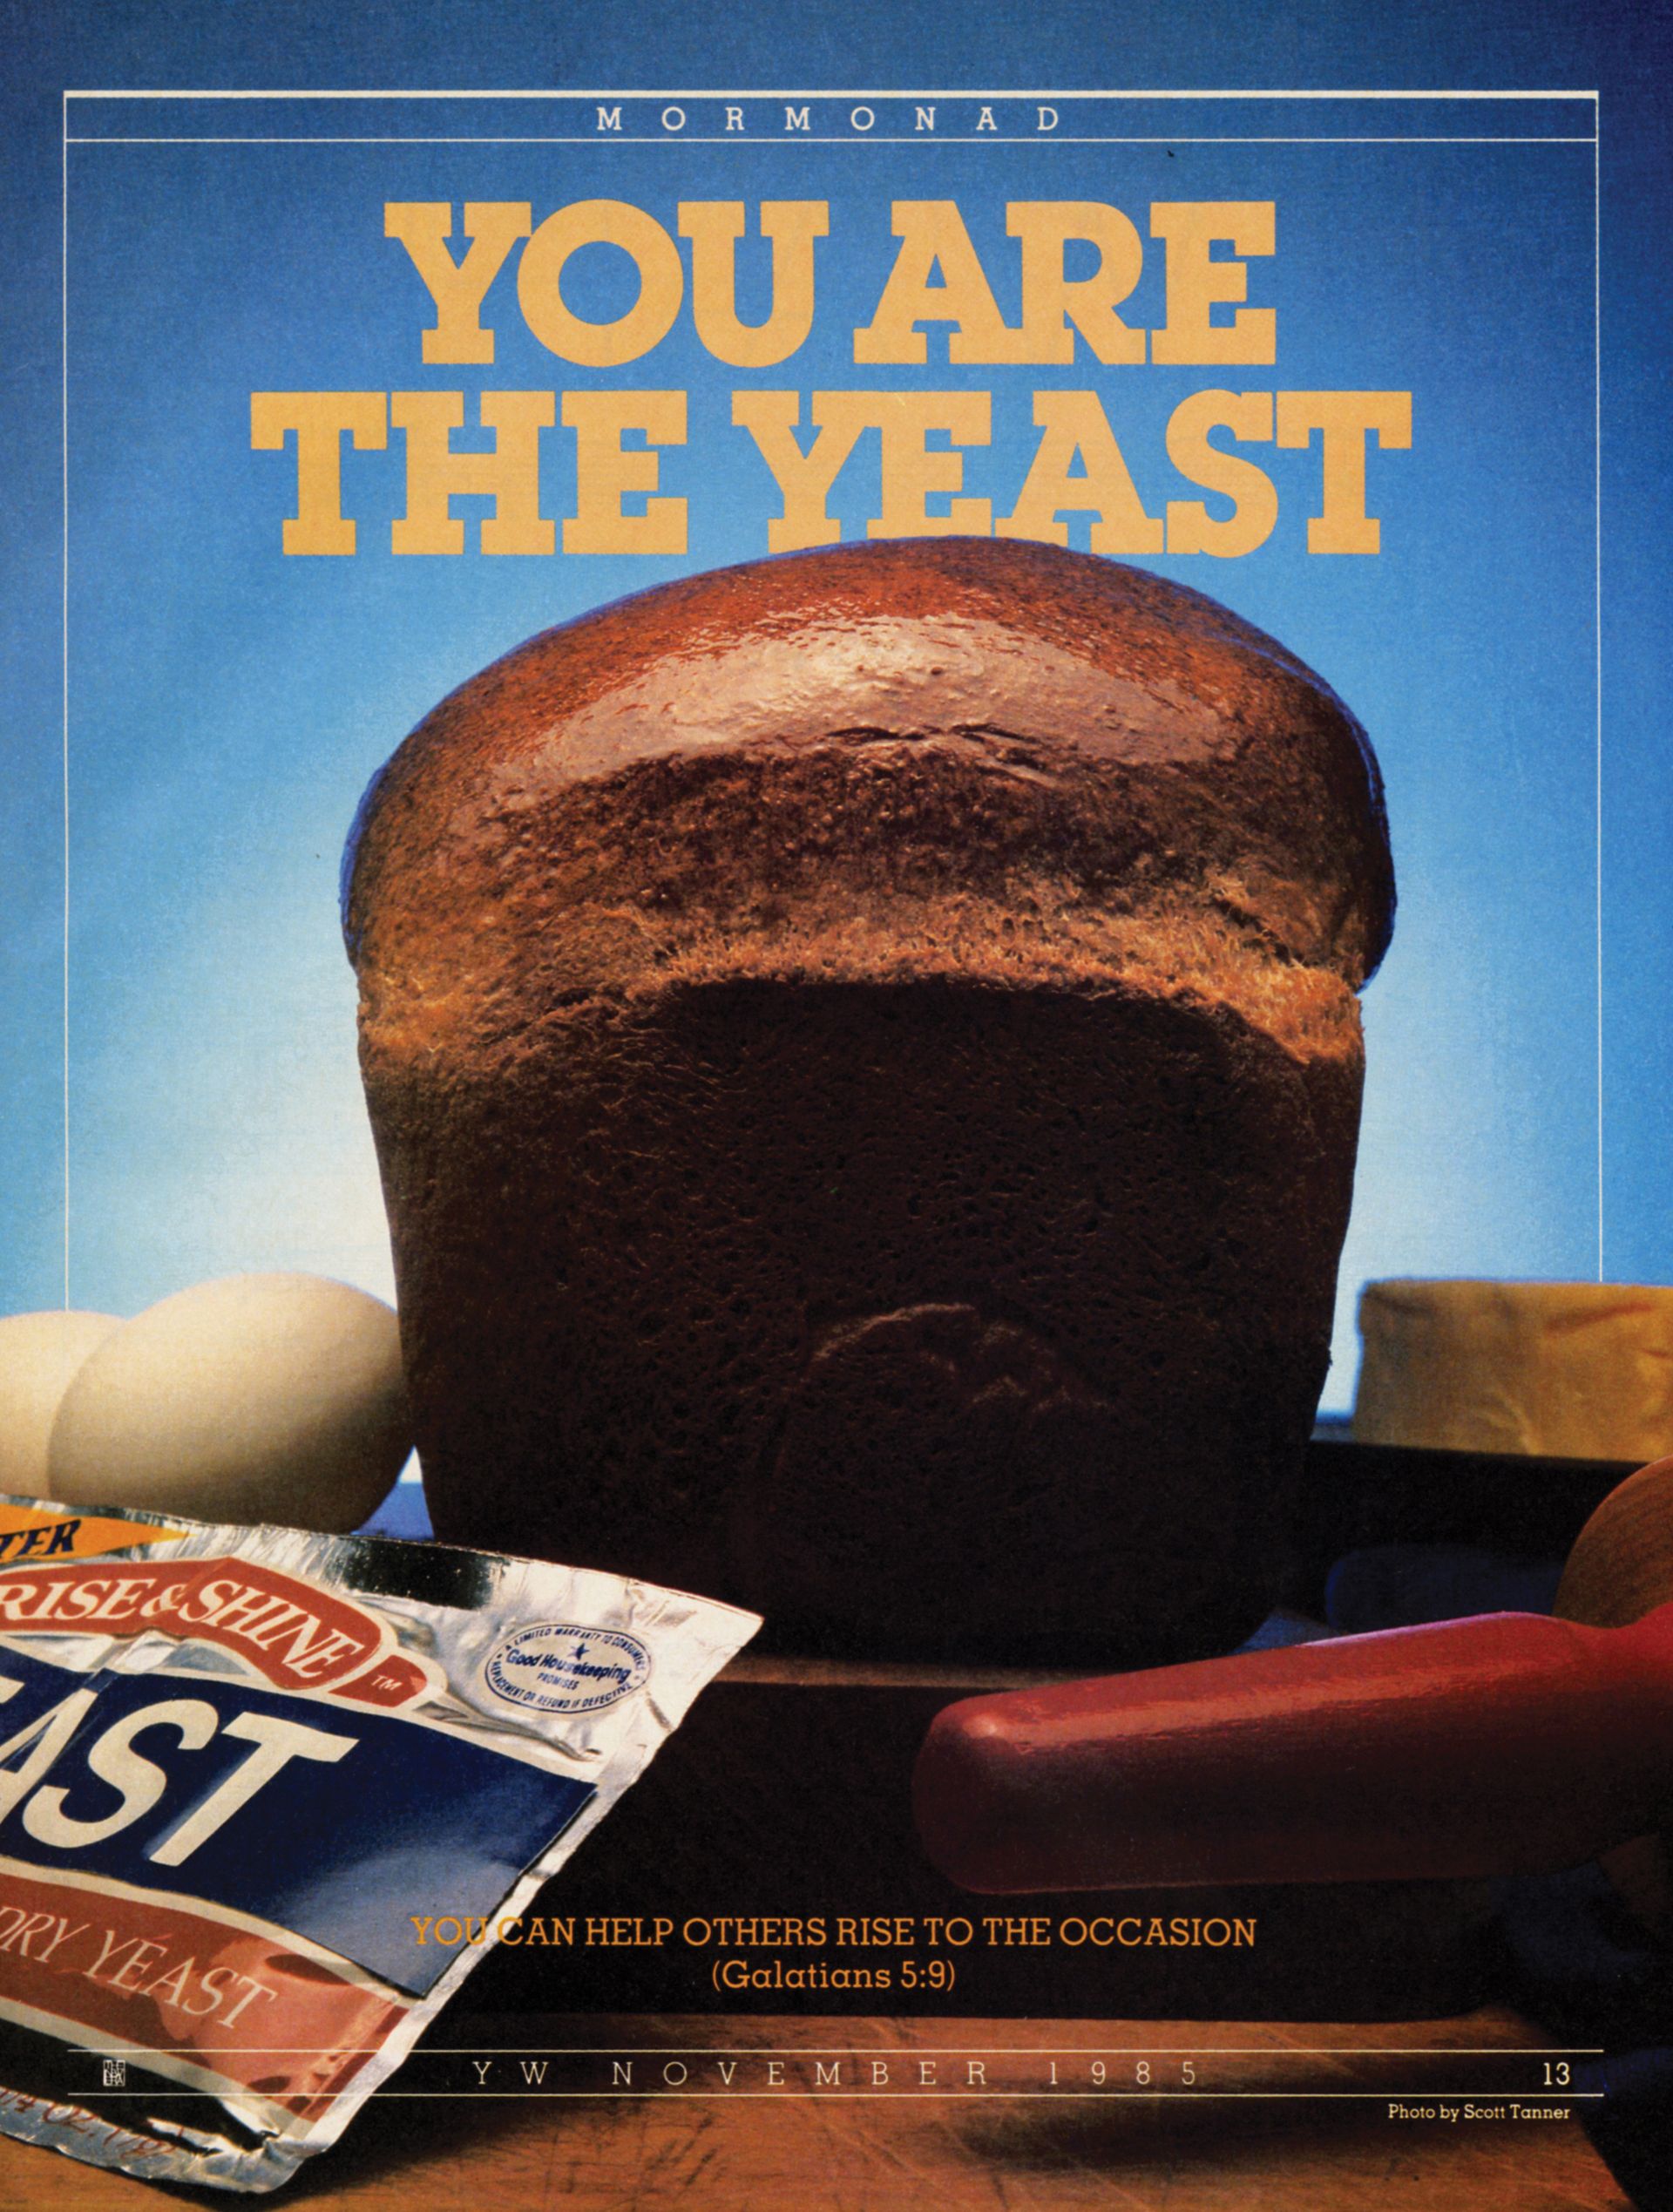 You Are the Yeast. You can help others rise to the occasion. (Galatians 5:9.) Nov. 1985 © undefined ipCode 1.